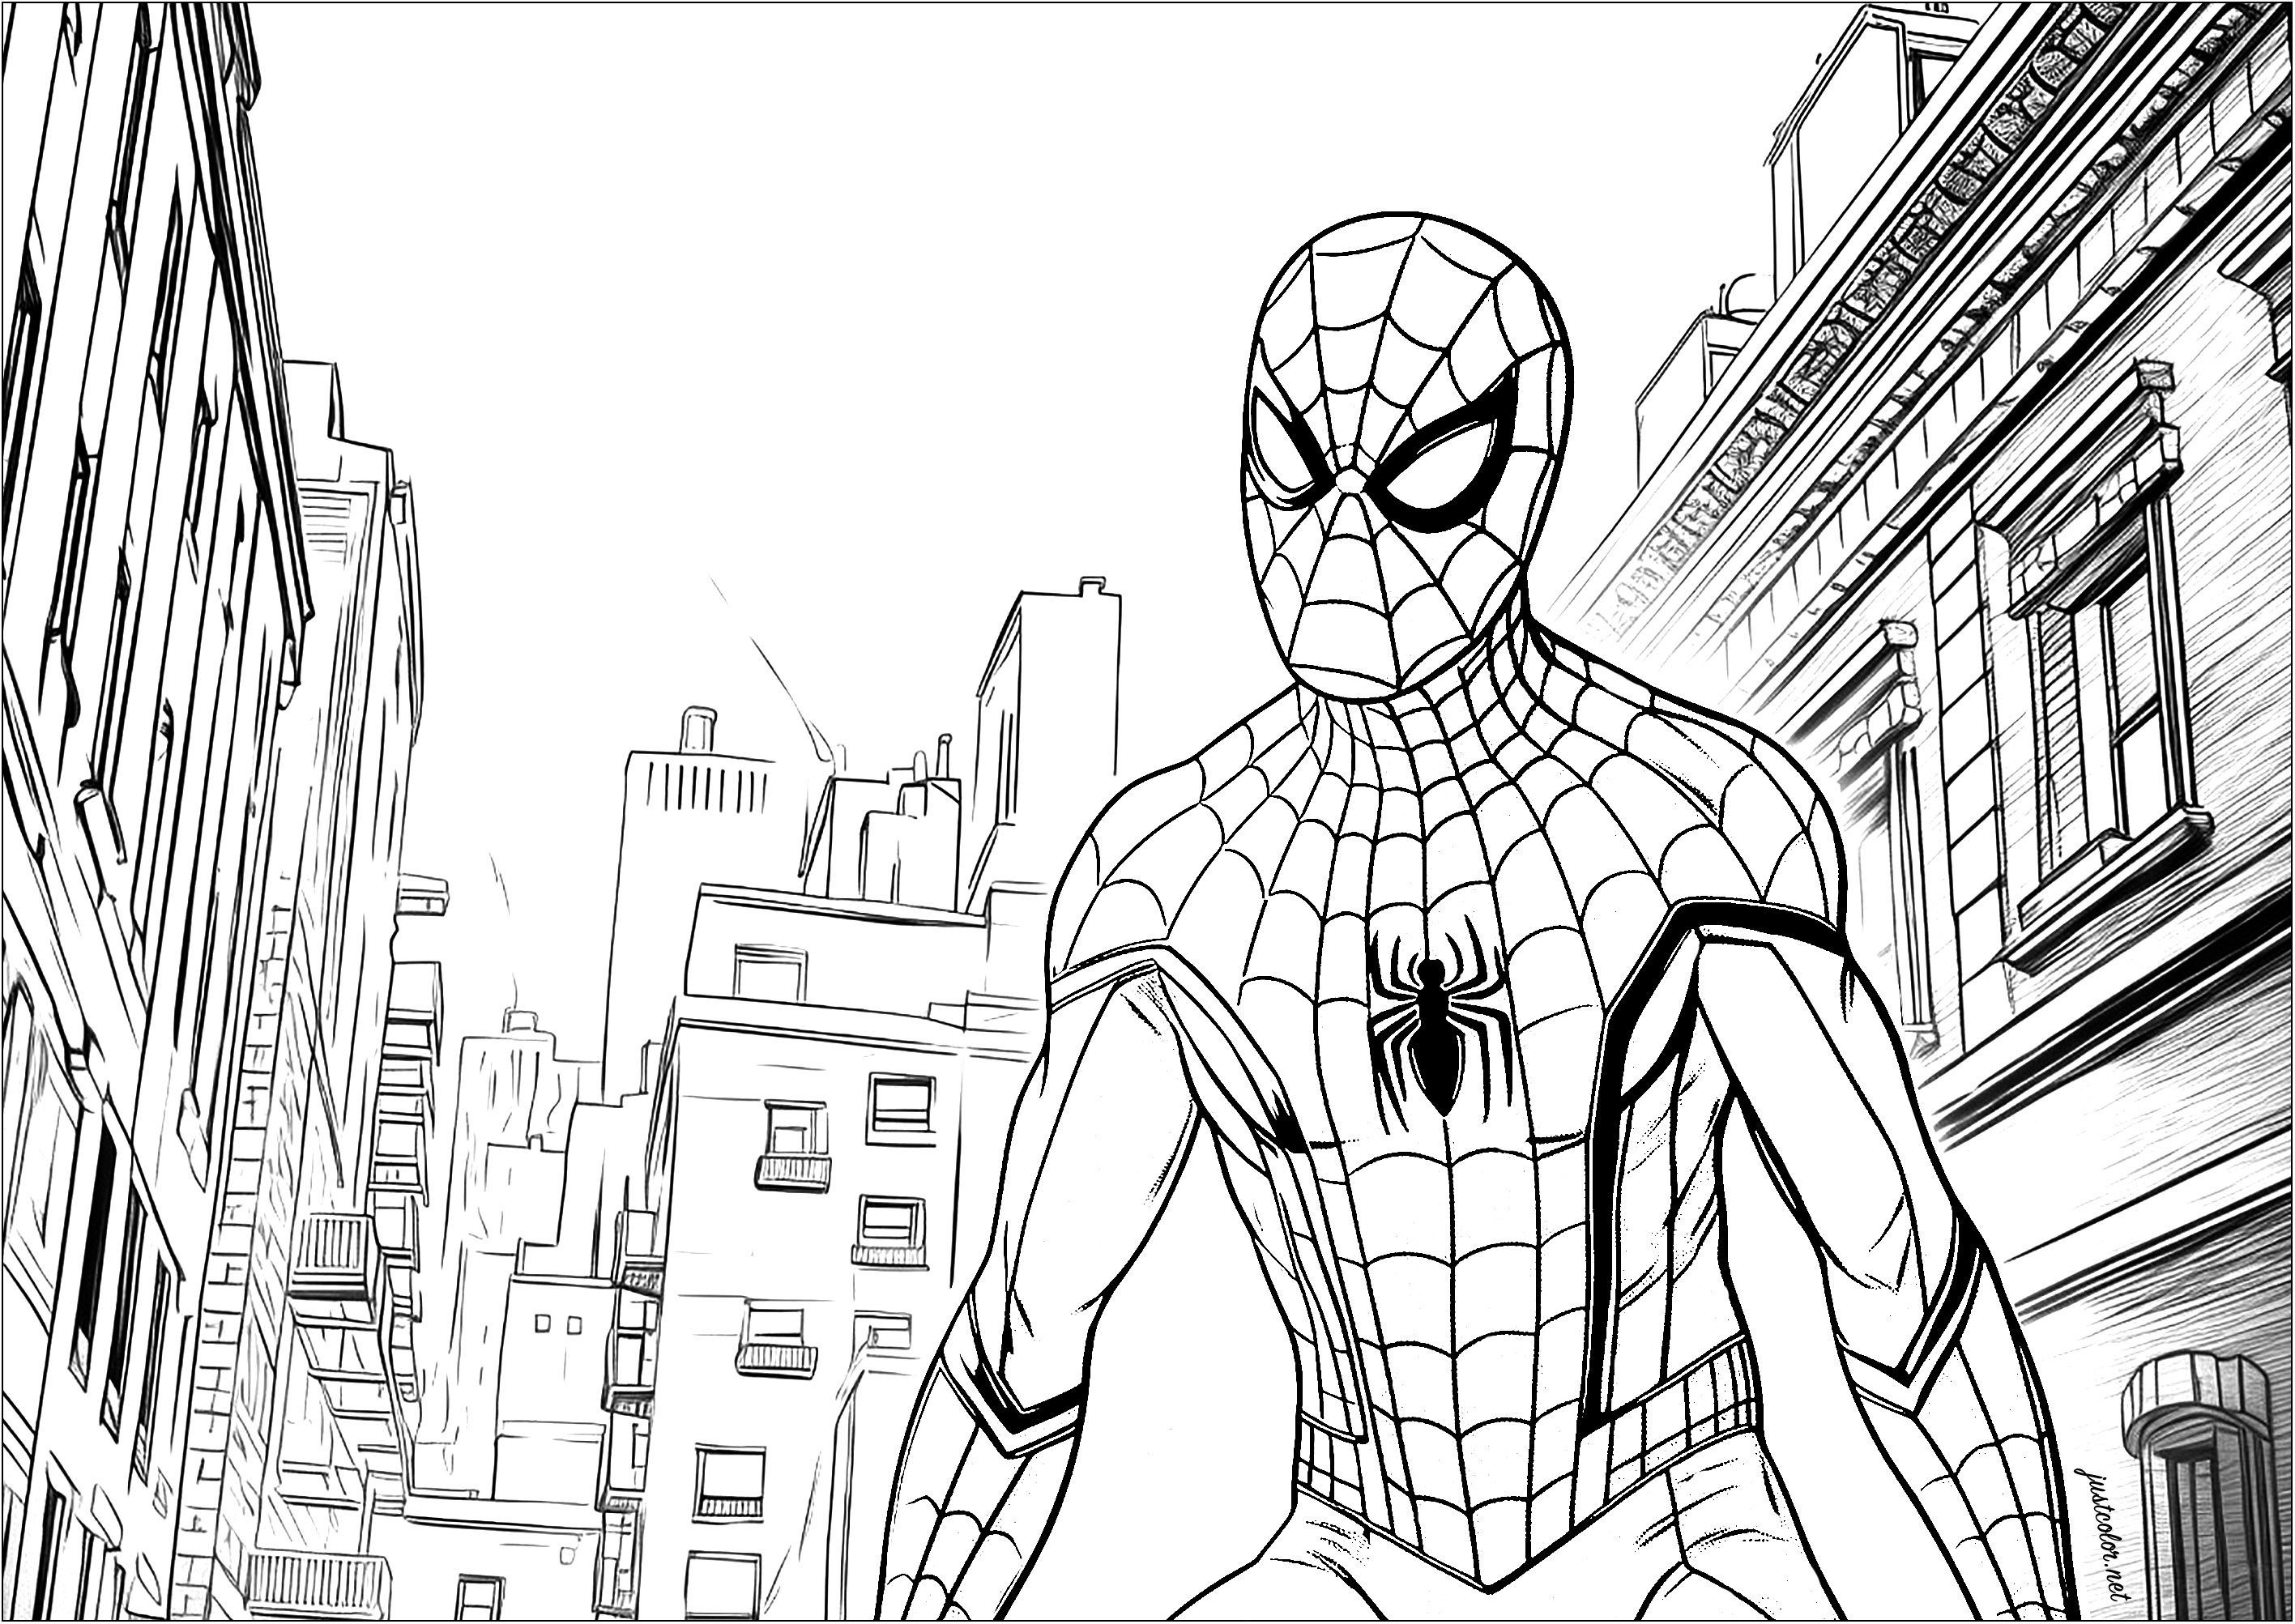 Spiderman in New York. Nice coloring page with Spiderman and New York buildings to color behind him